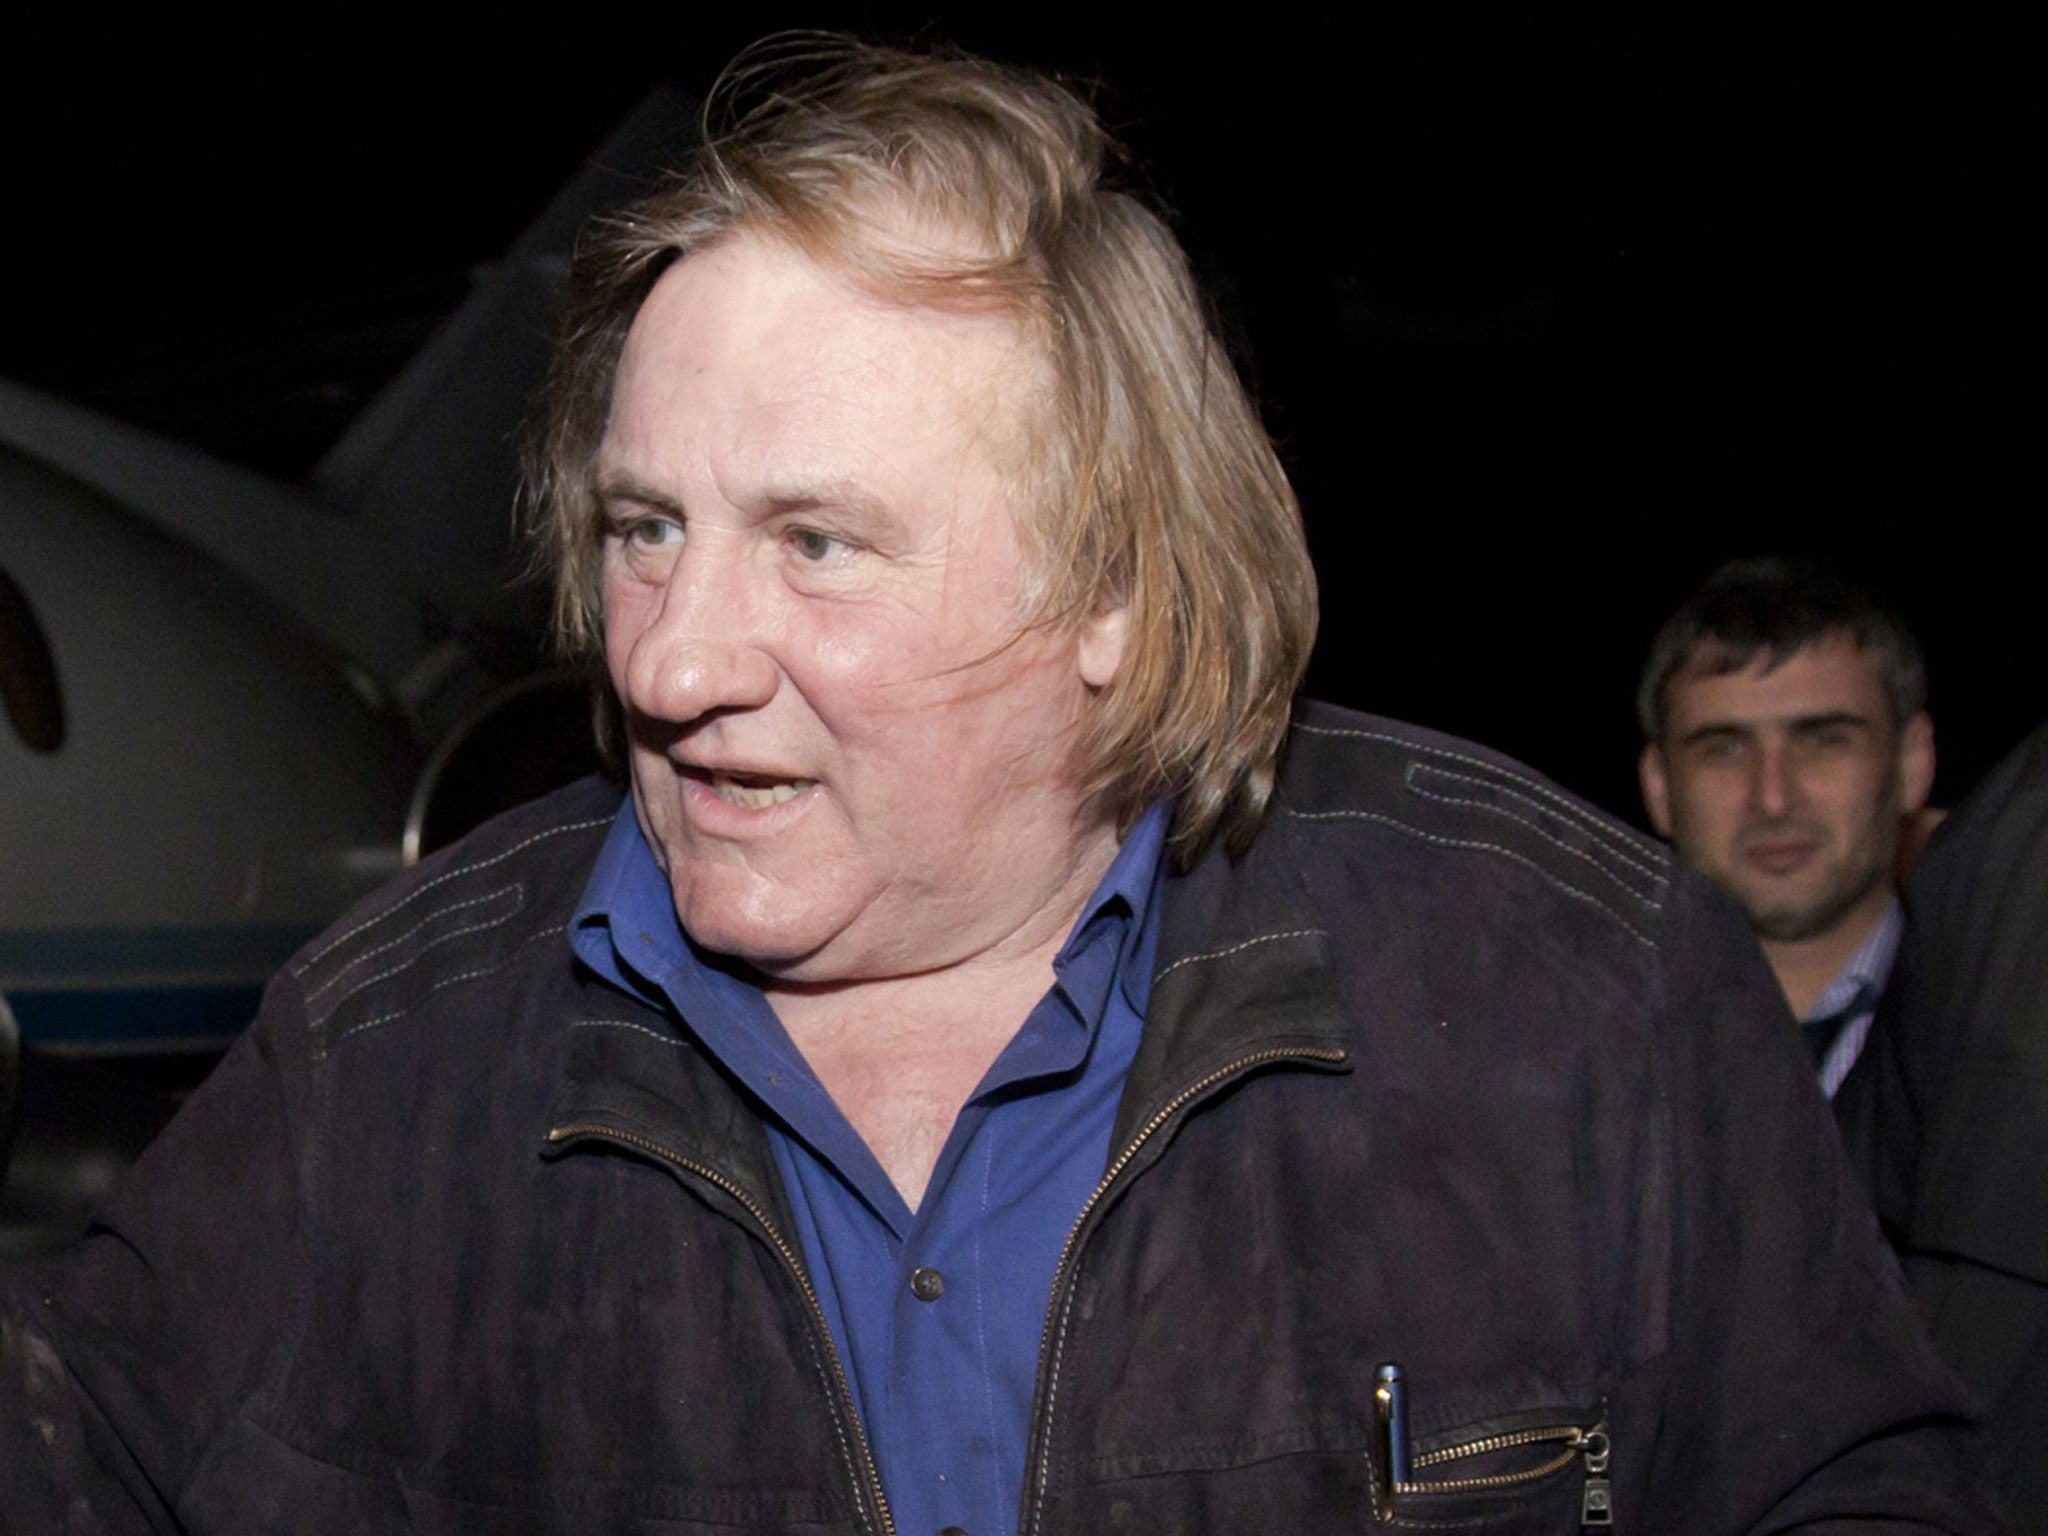 Depardieu said one of the reasons he moved was because of the quality of meat at his local butcher